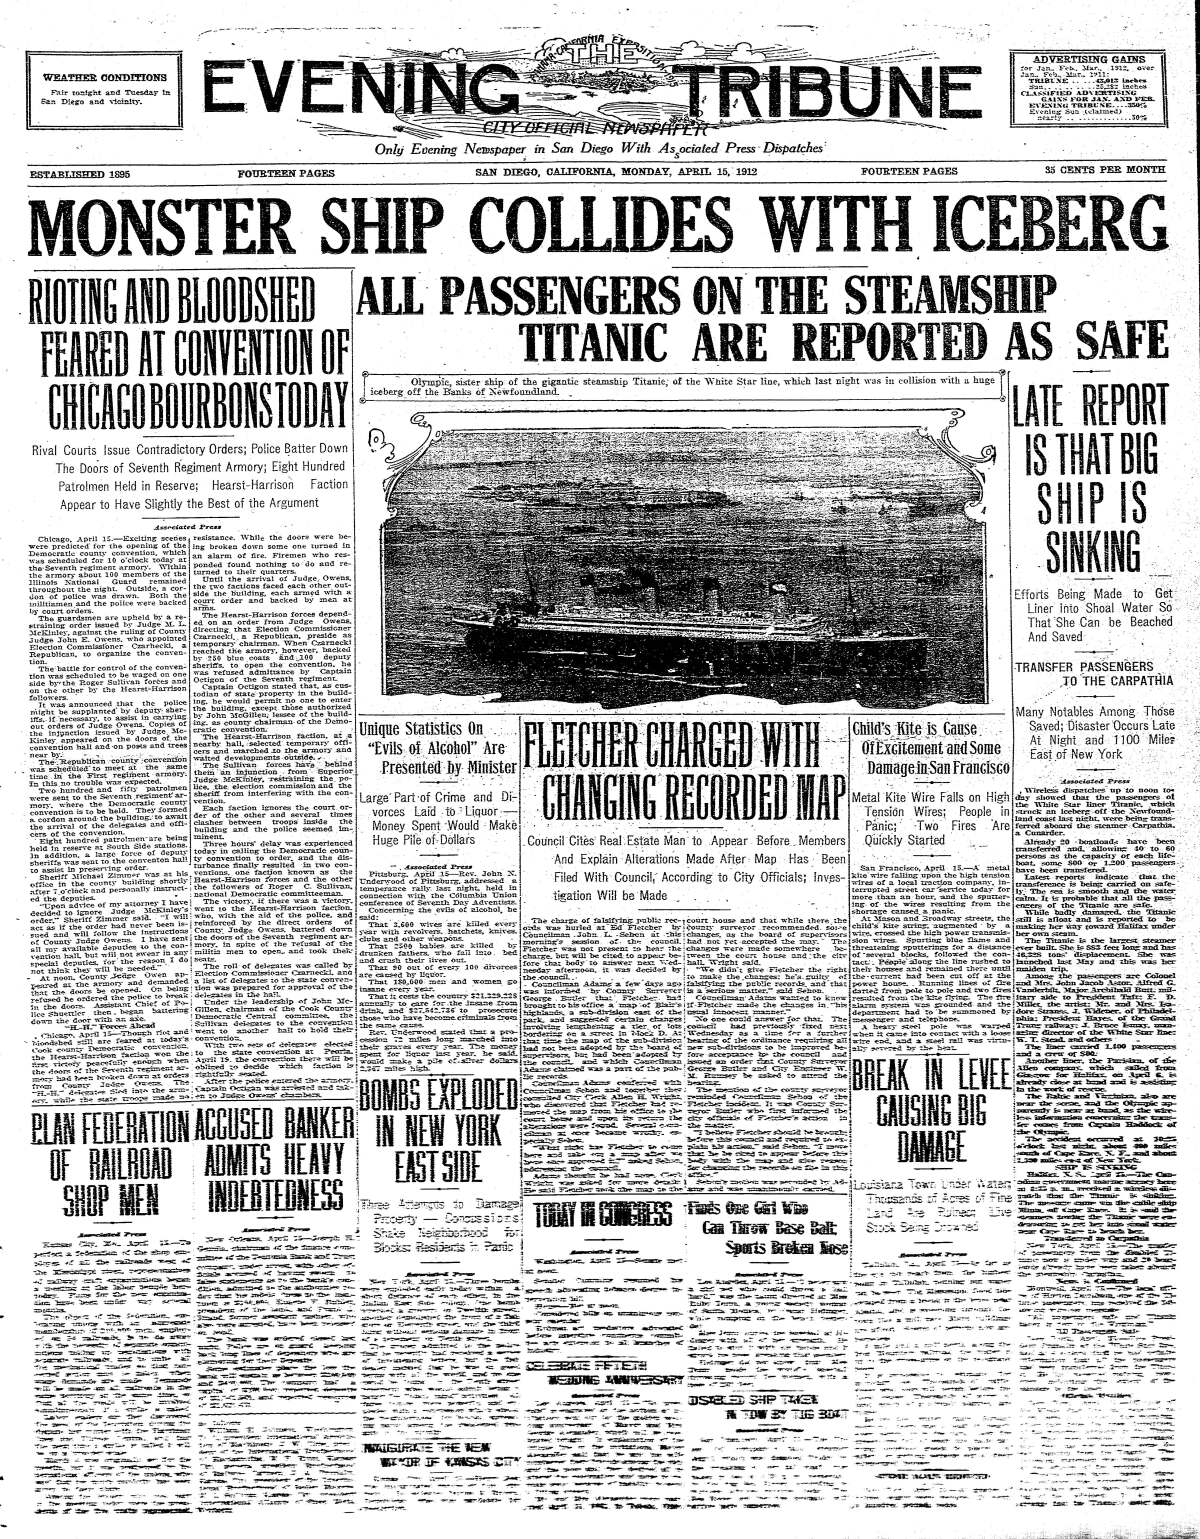 News that the Titanic had struck an iceberg dominated the front page of the Evening Tribune, Monday, April 15, 1912 